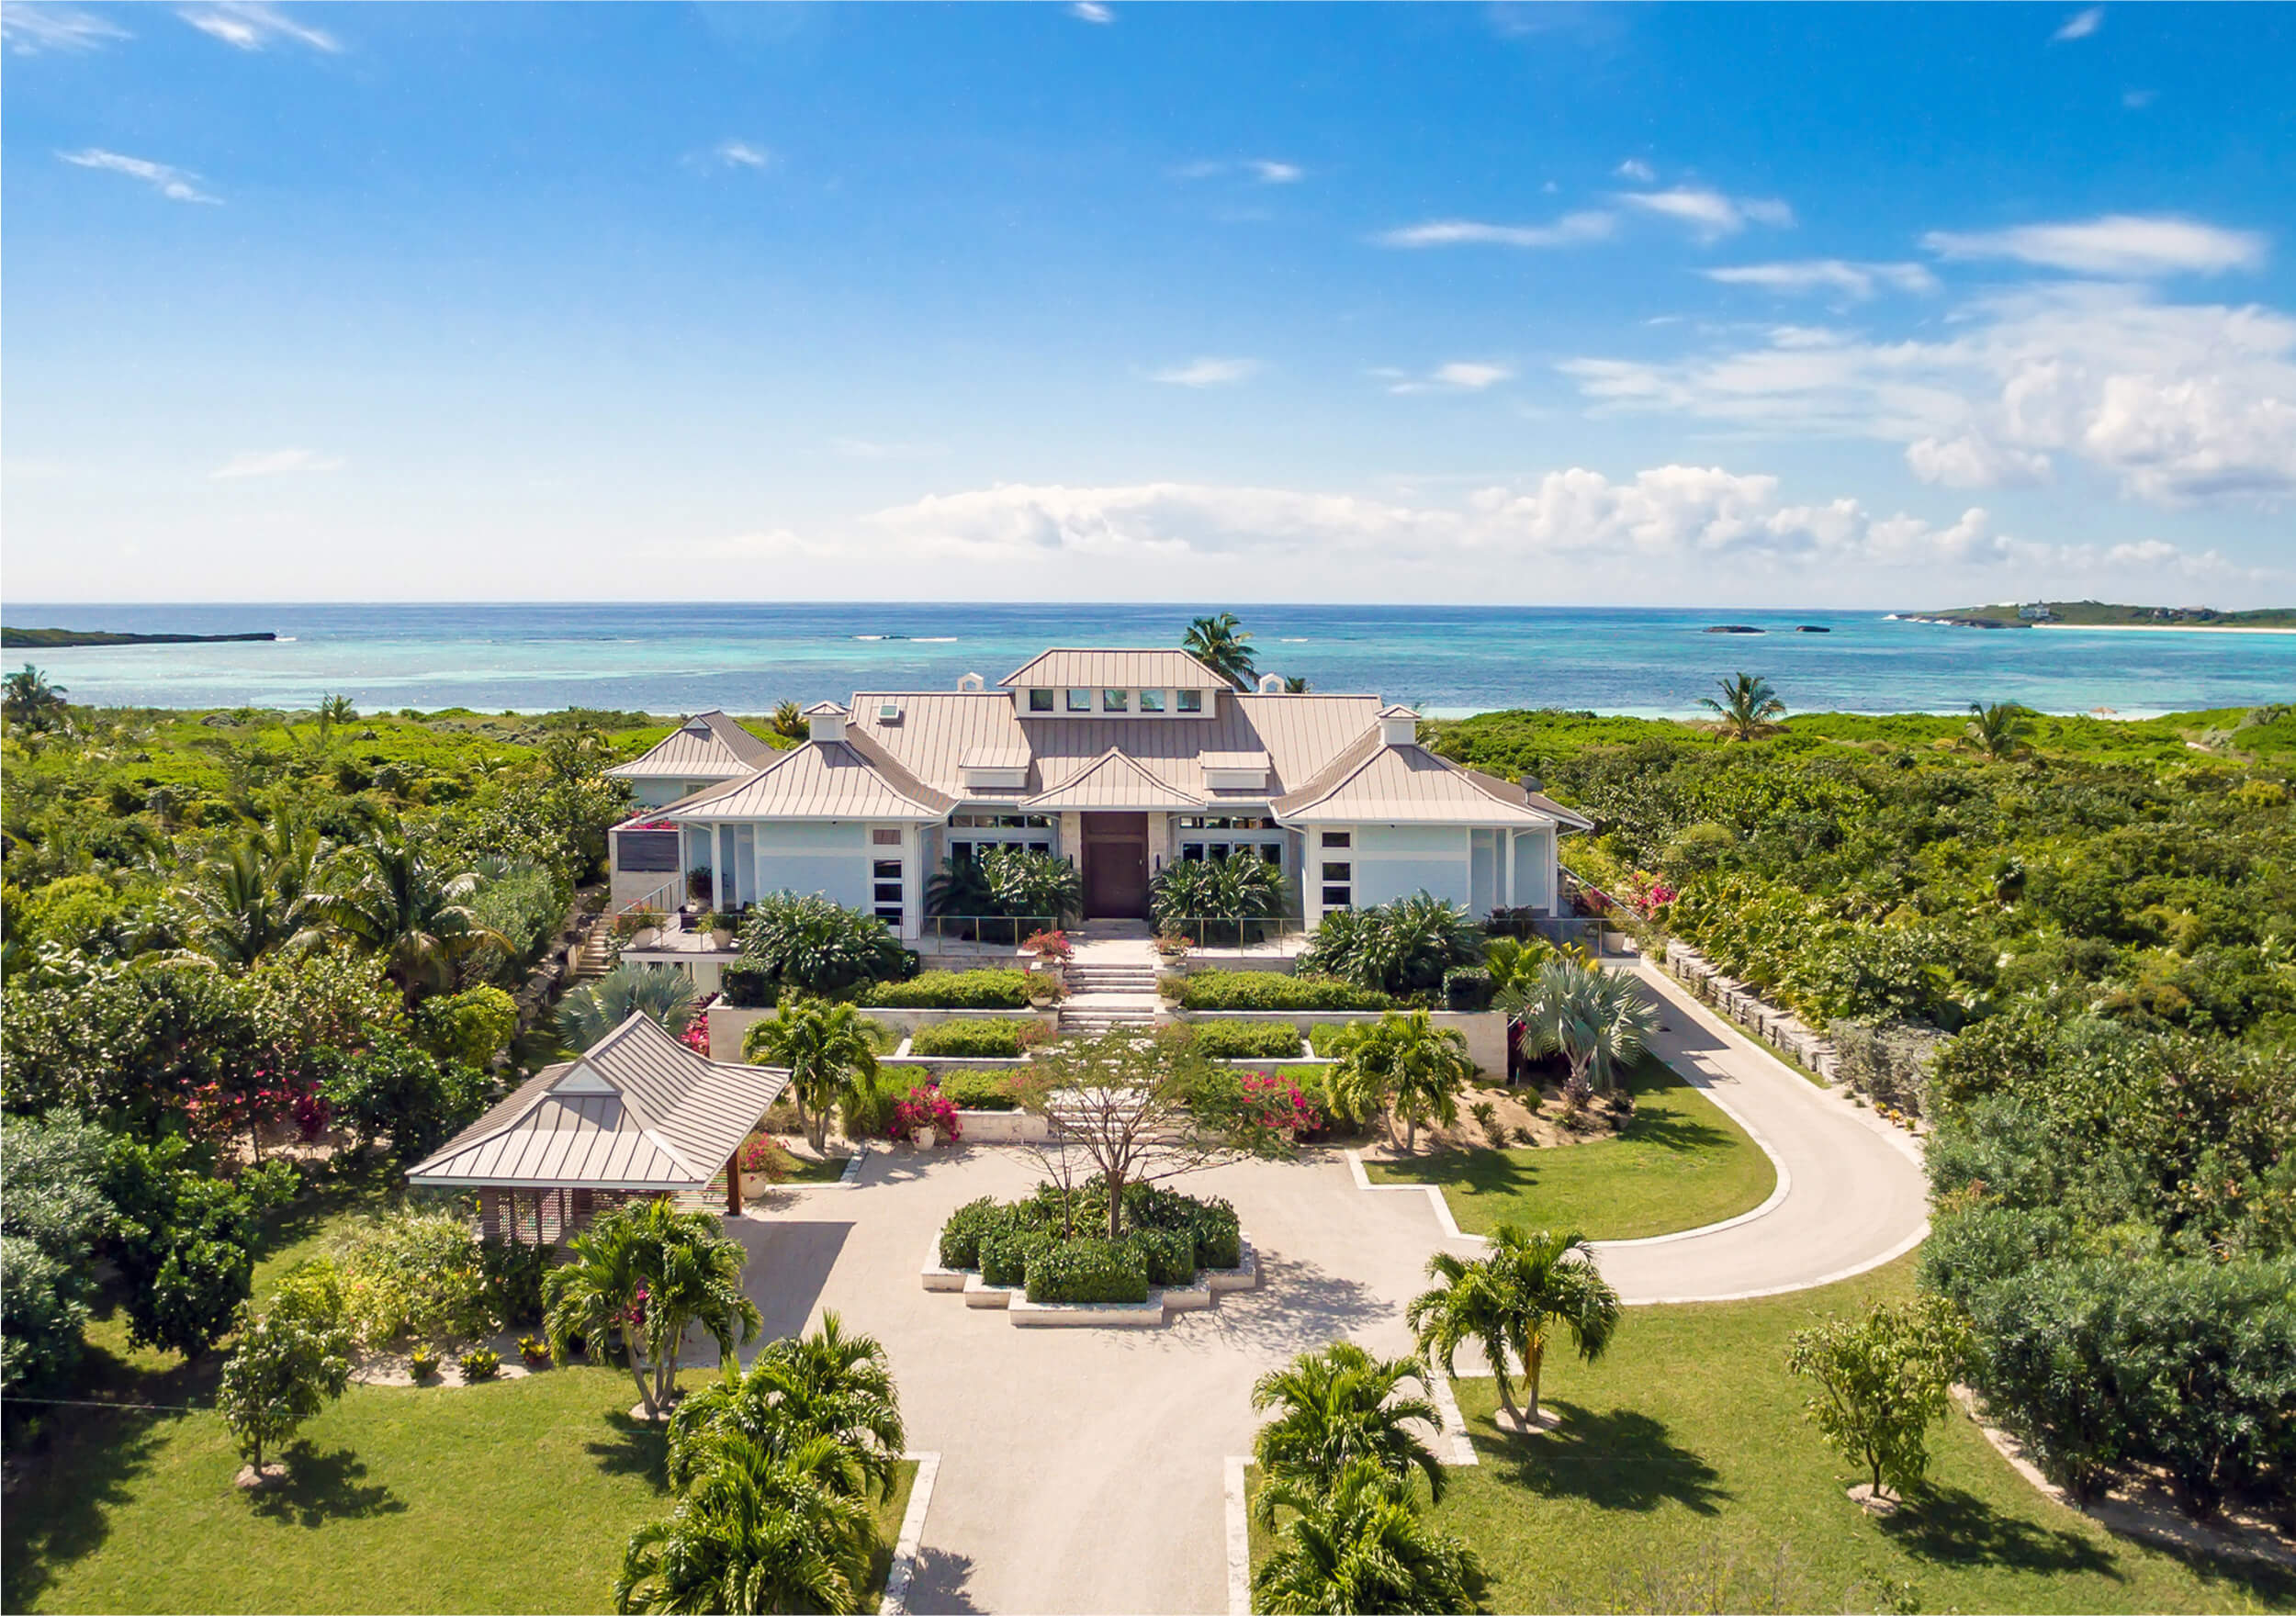 Aerial view of a house in The Estates neighborhood at The Abaco Club surrounded by lush tropical greenery, showcasing the exclusive experience of coastal living in The Bahamas.